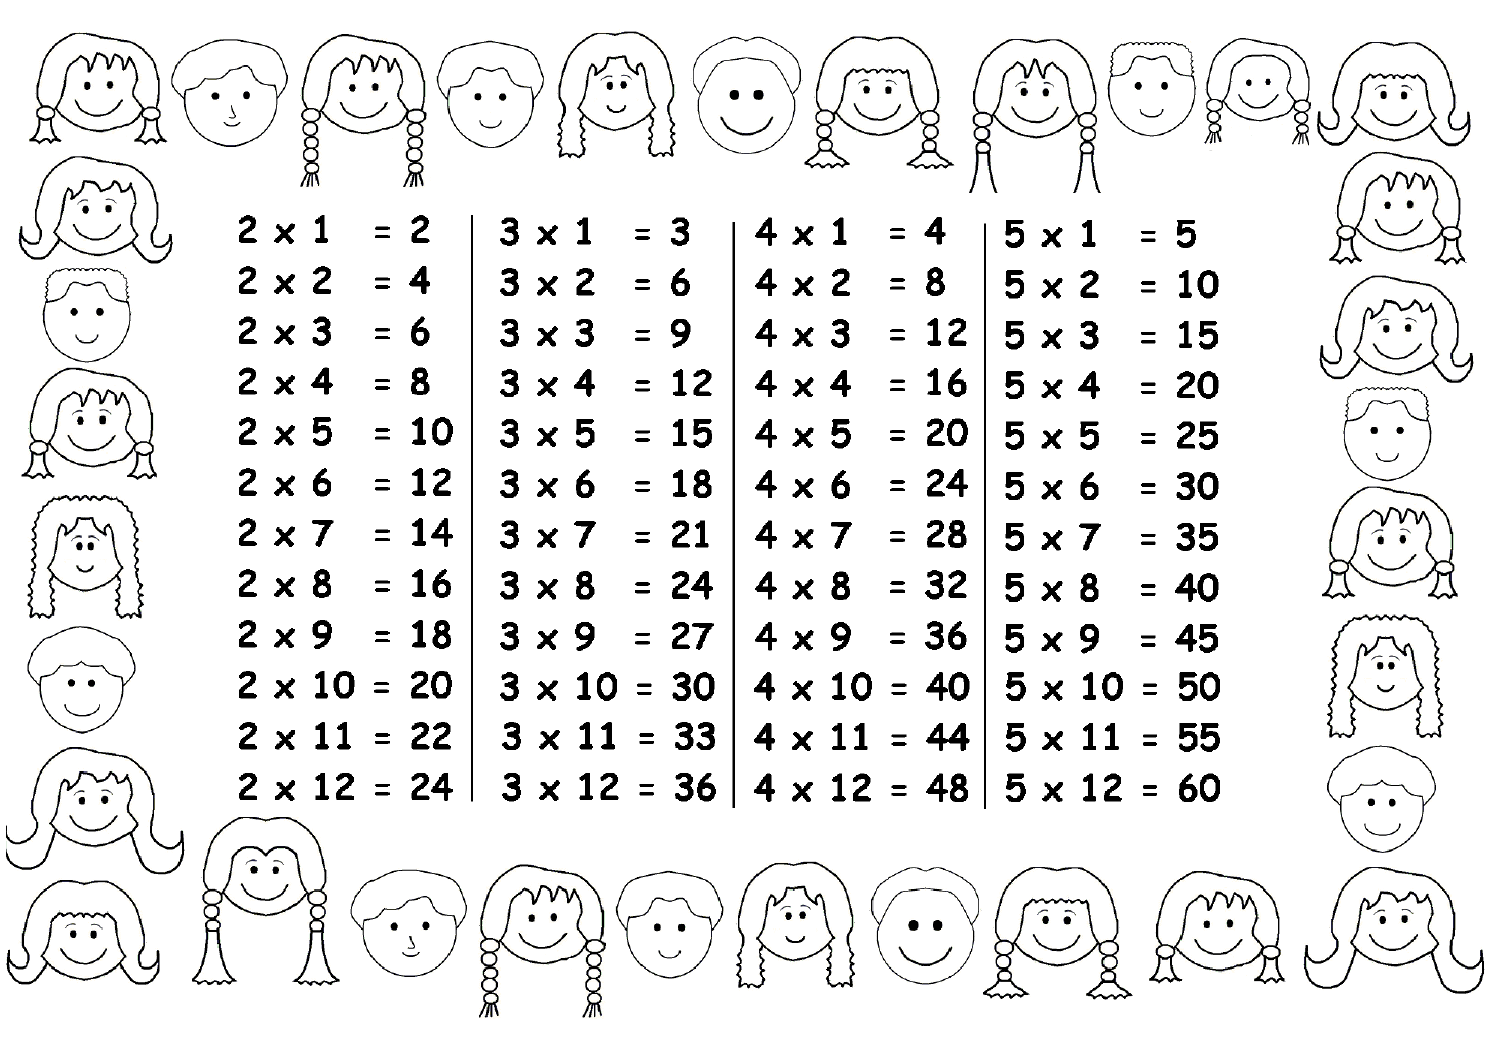 Times Table Chart - 2, 3, 4, 5 / FREE Printable Worksheets ...